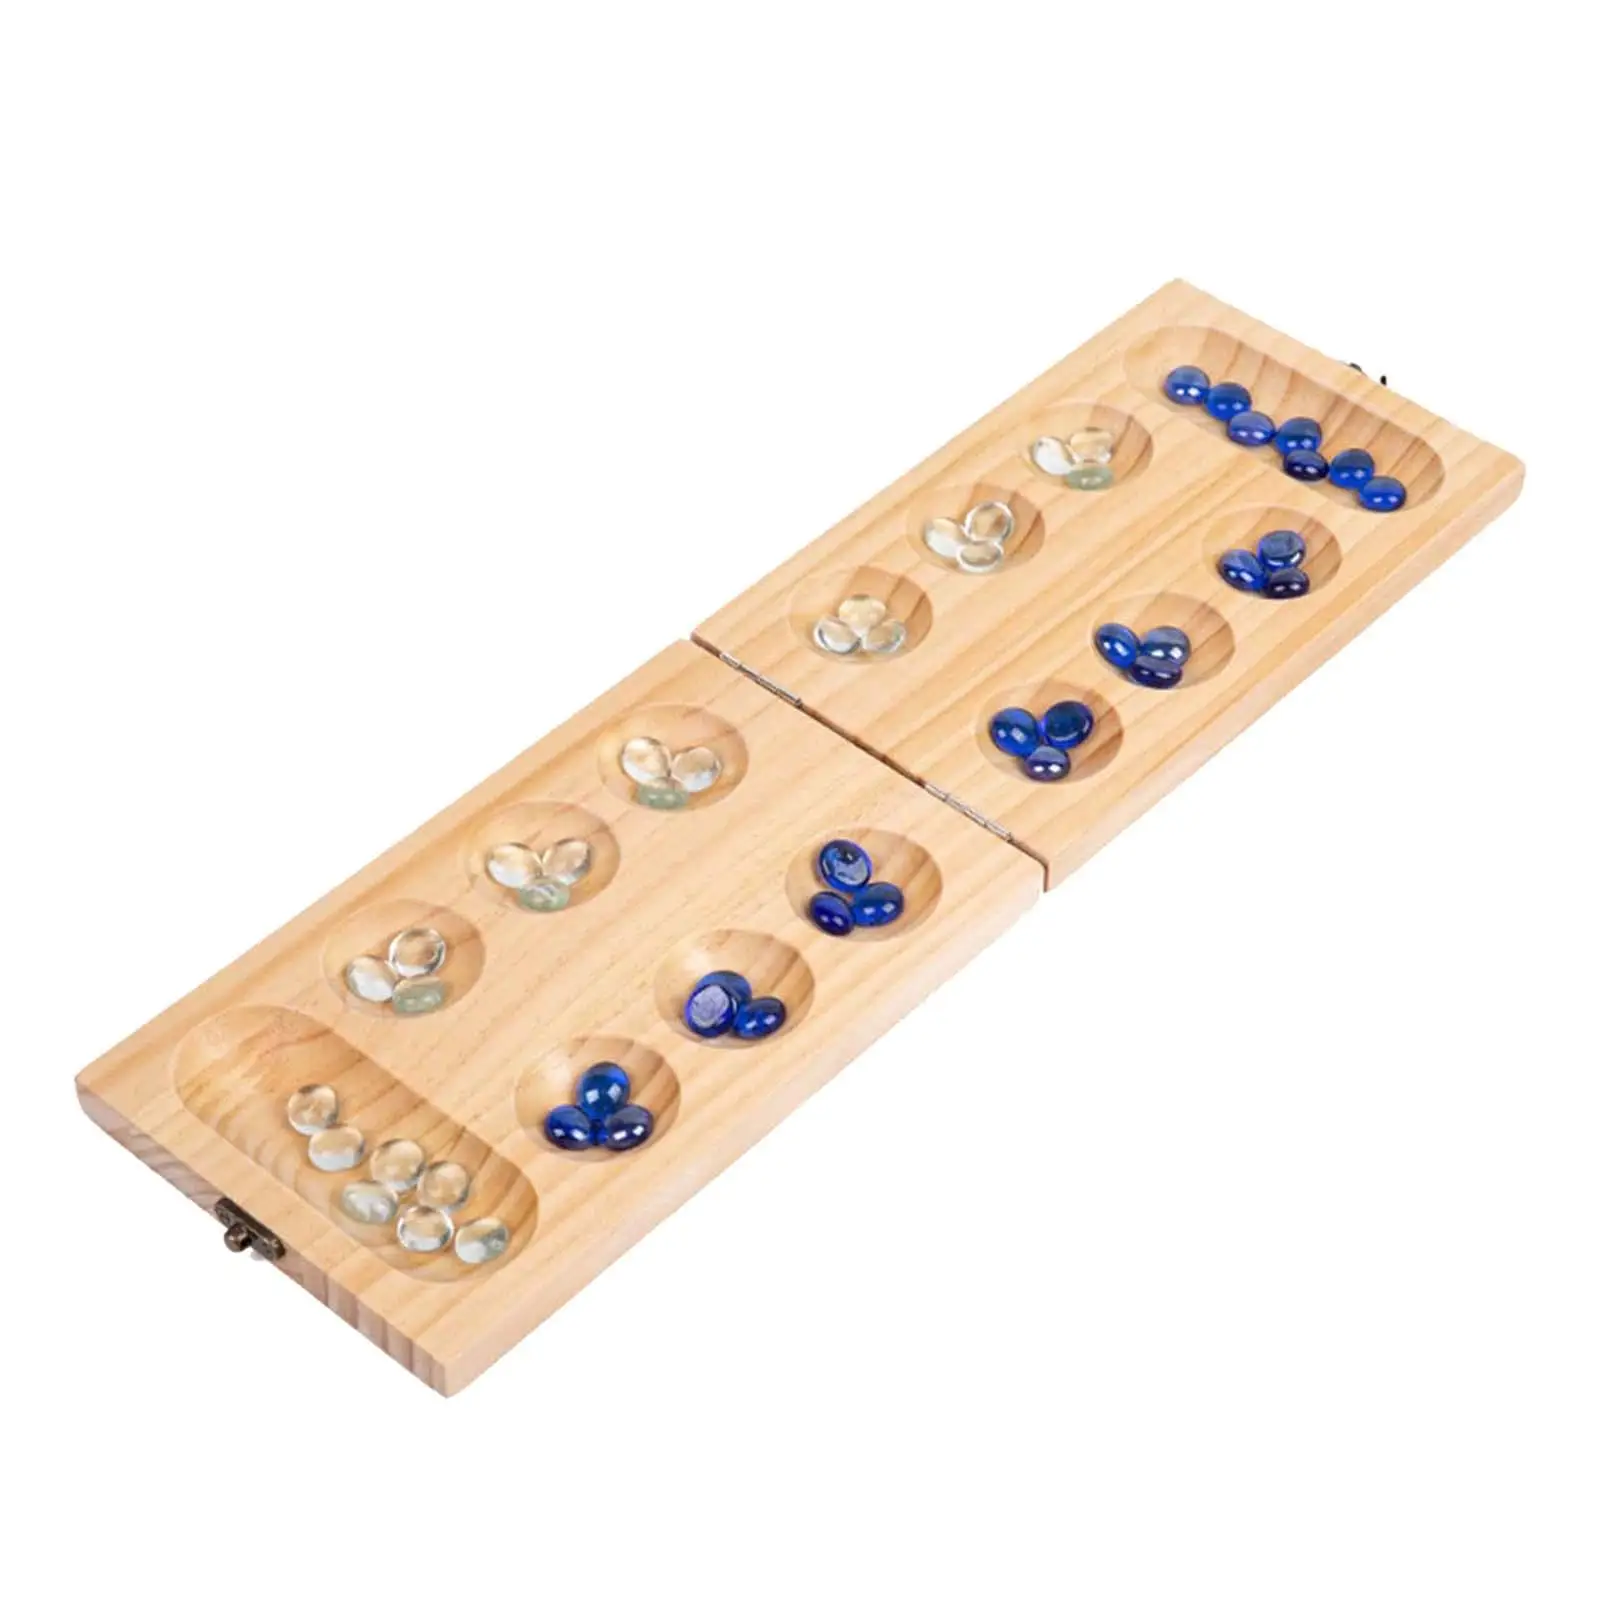 Wooden Mancala Board Game Portable Classic 2 Player Game Family Games for Children and Adults Party Entertainment Teen Travel